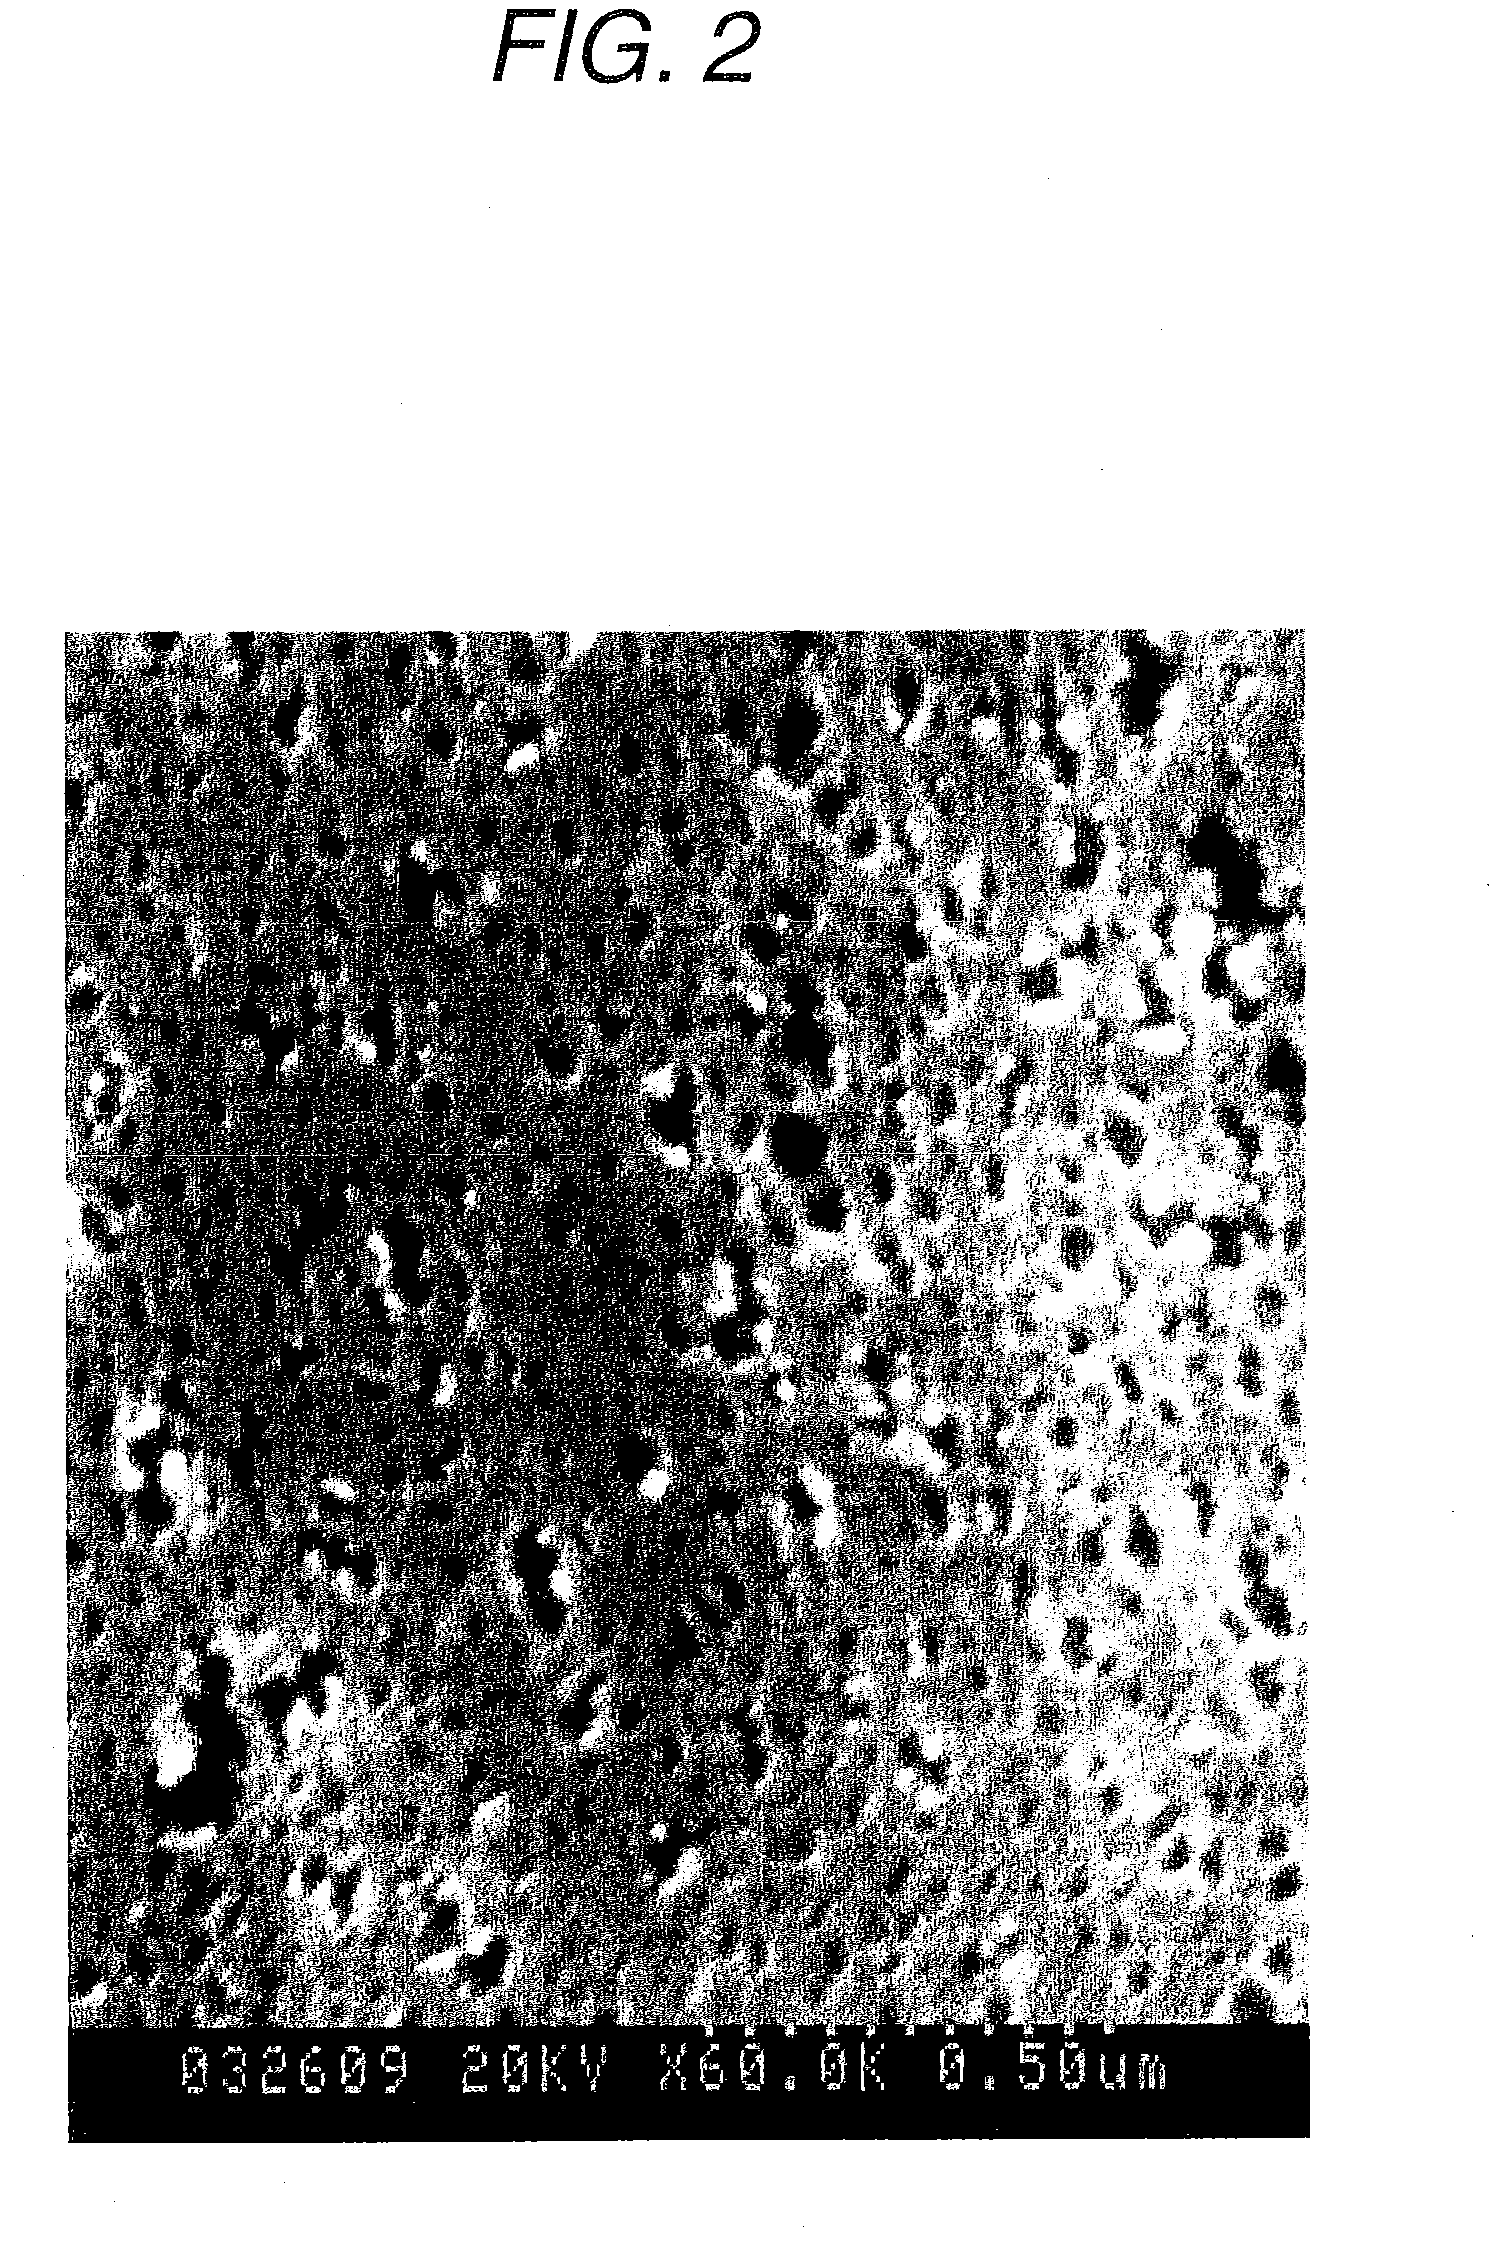 Polymer separation membrane and process for producing the same